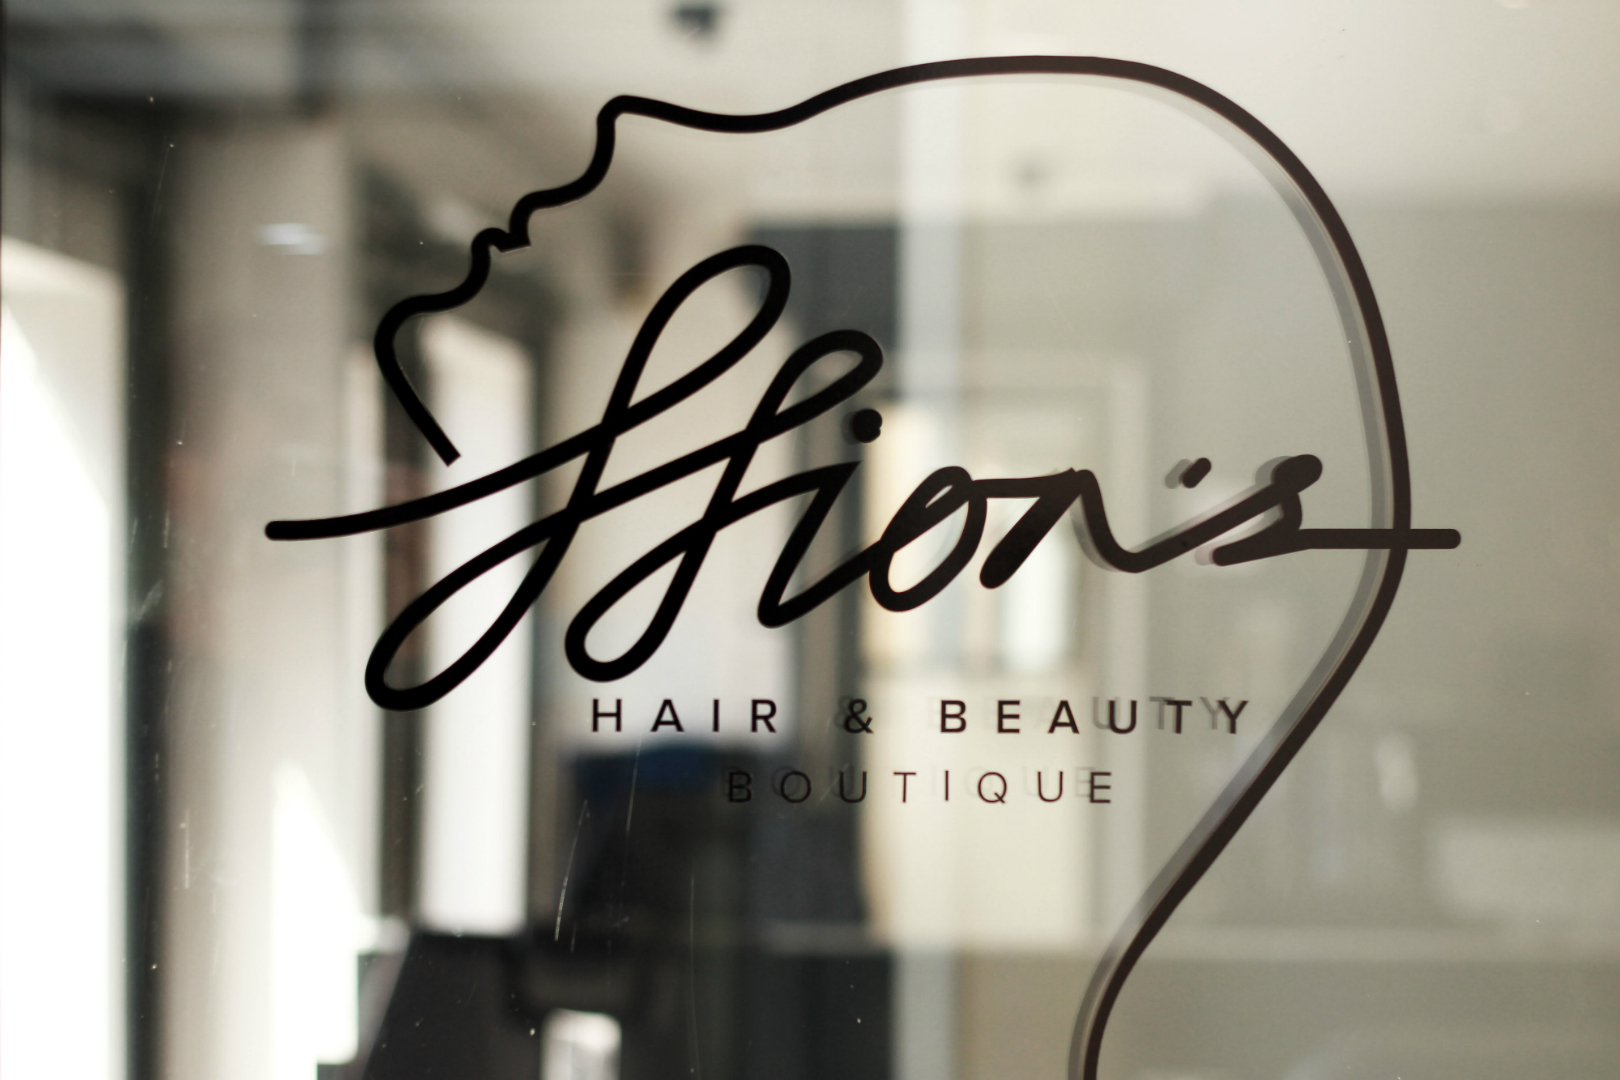 Gallery | Ffions Hair & Beauty Boutique